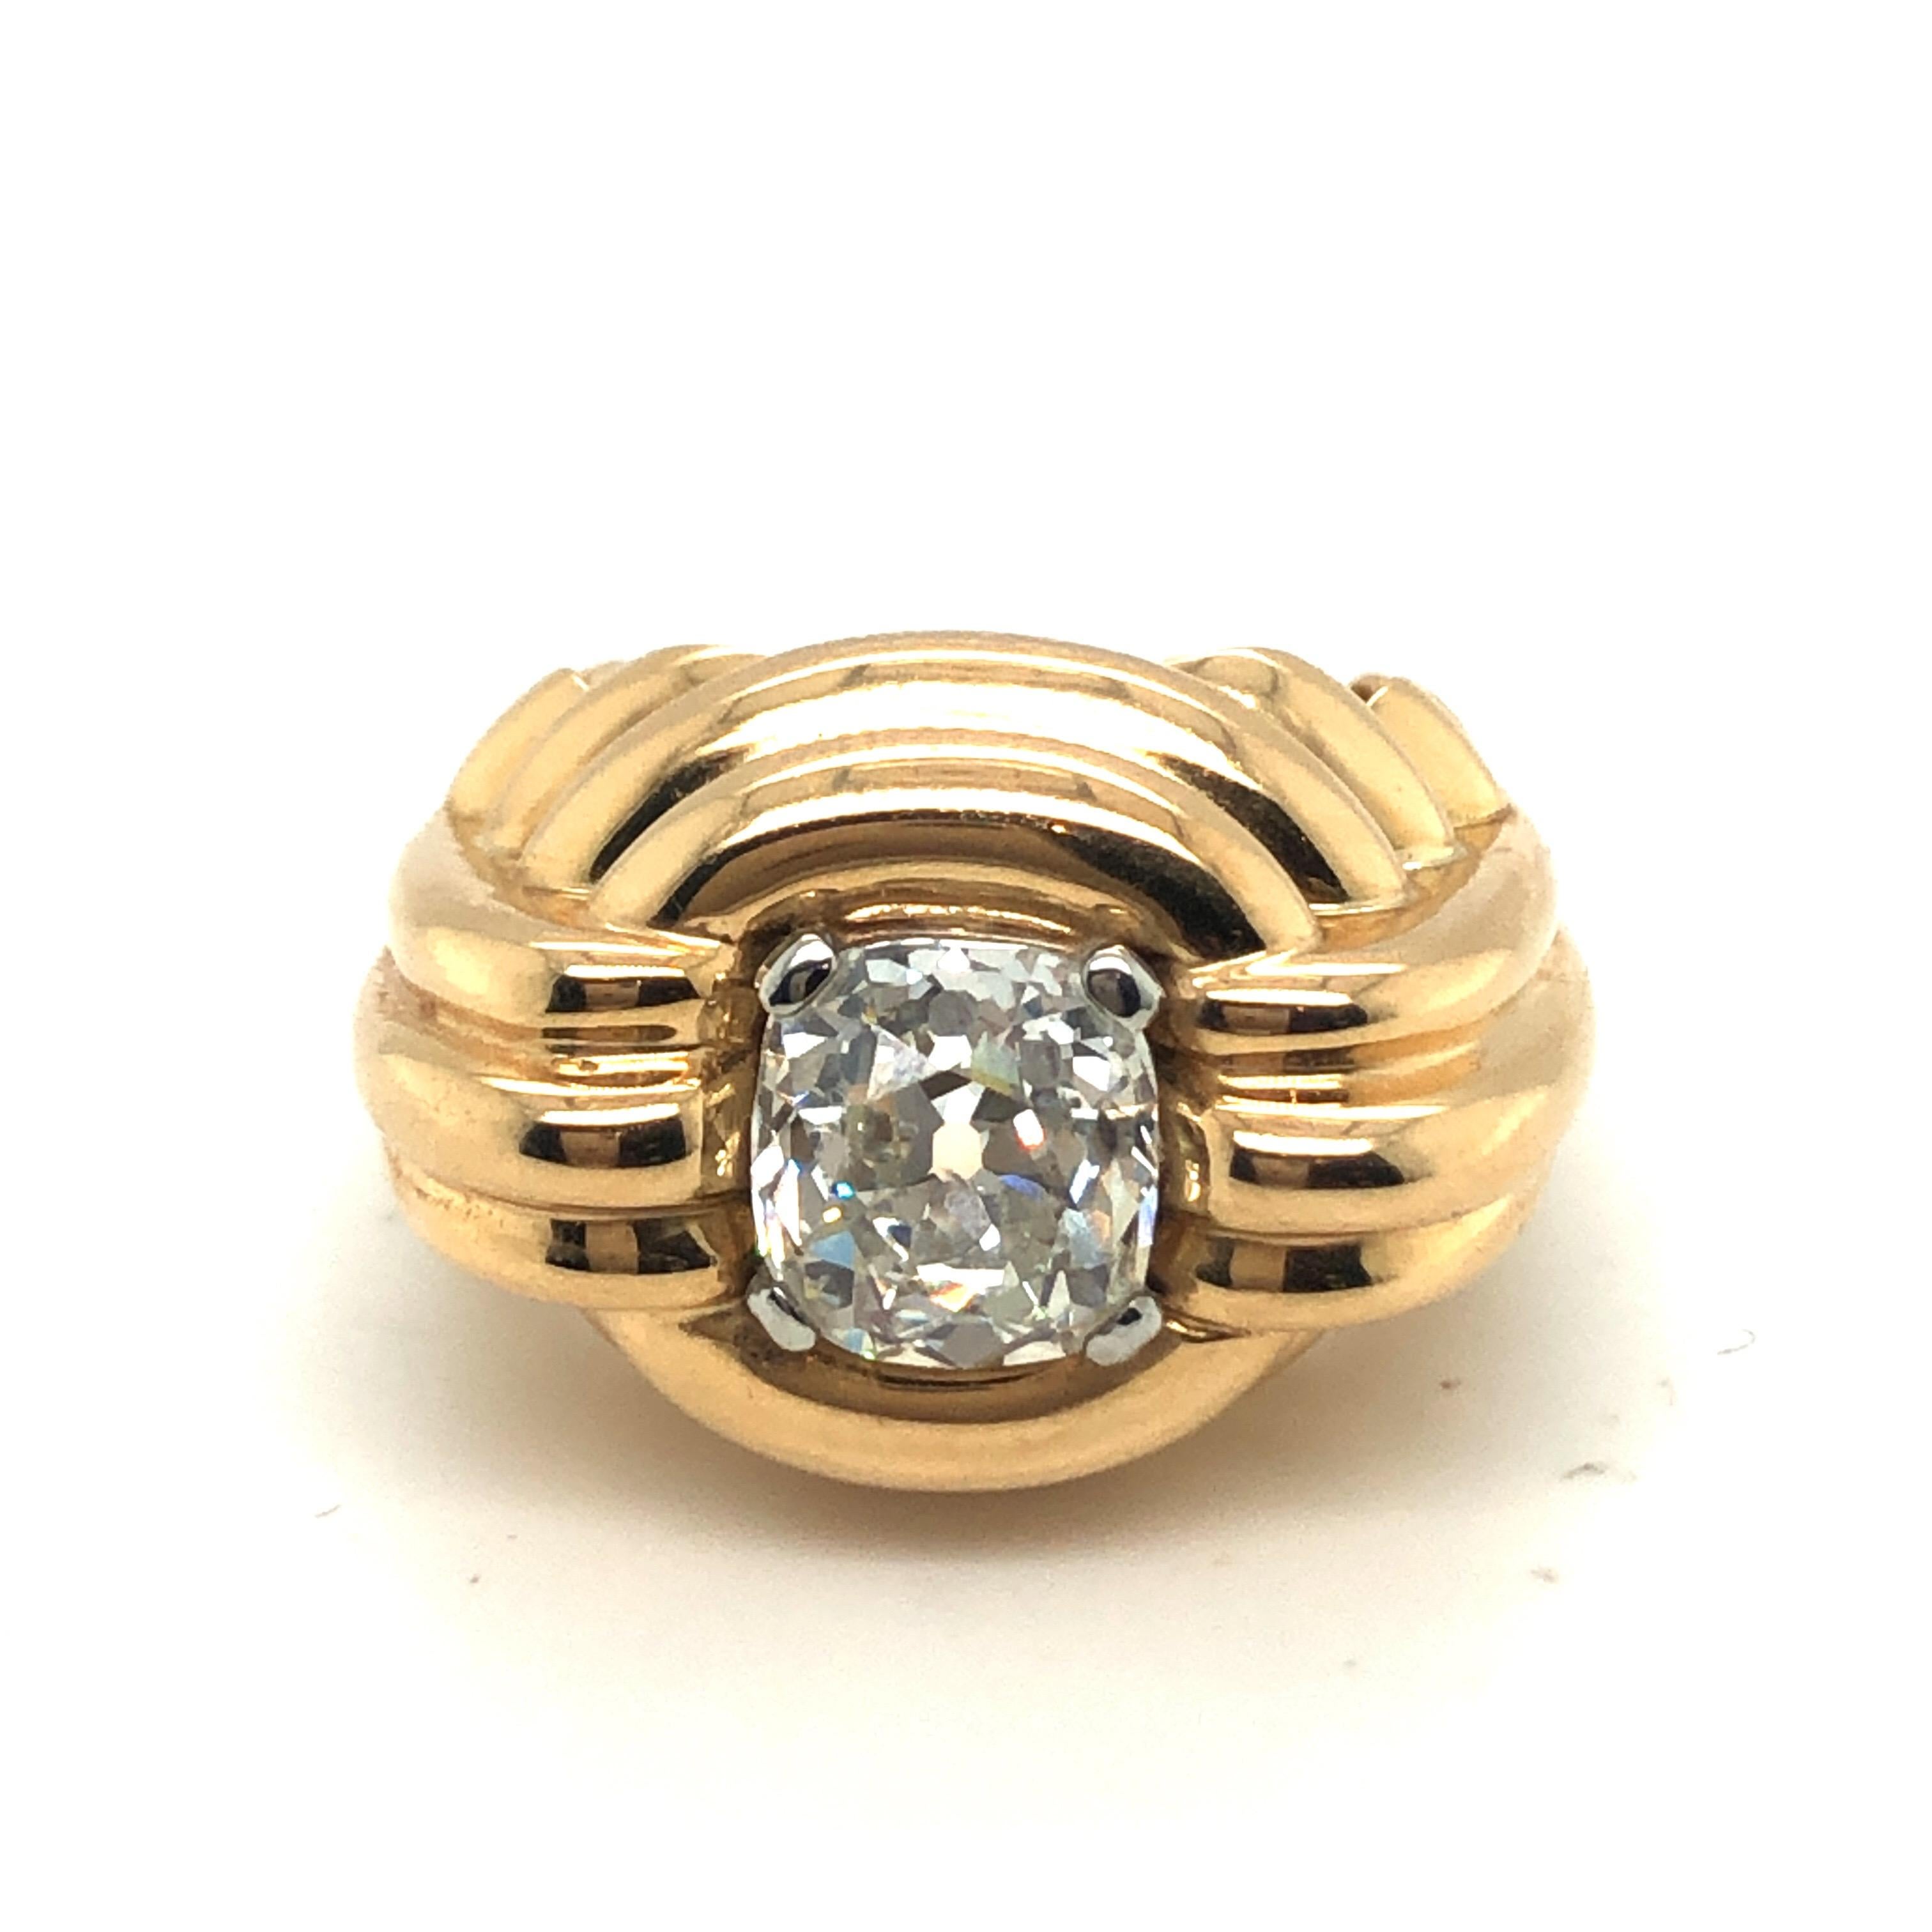 One-of-a-kind 2.63 carats cushion-shape diamond and 18 karat rose gold French ring, 1940s.
Of bold design and masterfully handcrafted in 18 karat rose gold, this statement ring is set with a 2.63 carats cushion-shaped old mine diamond, which is